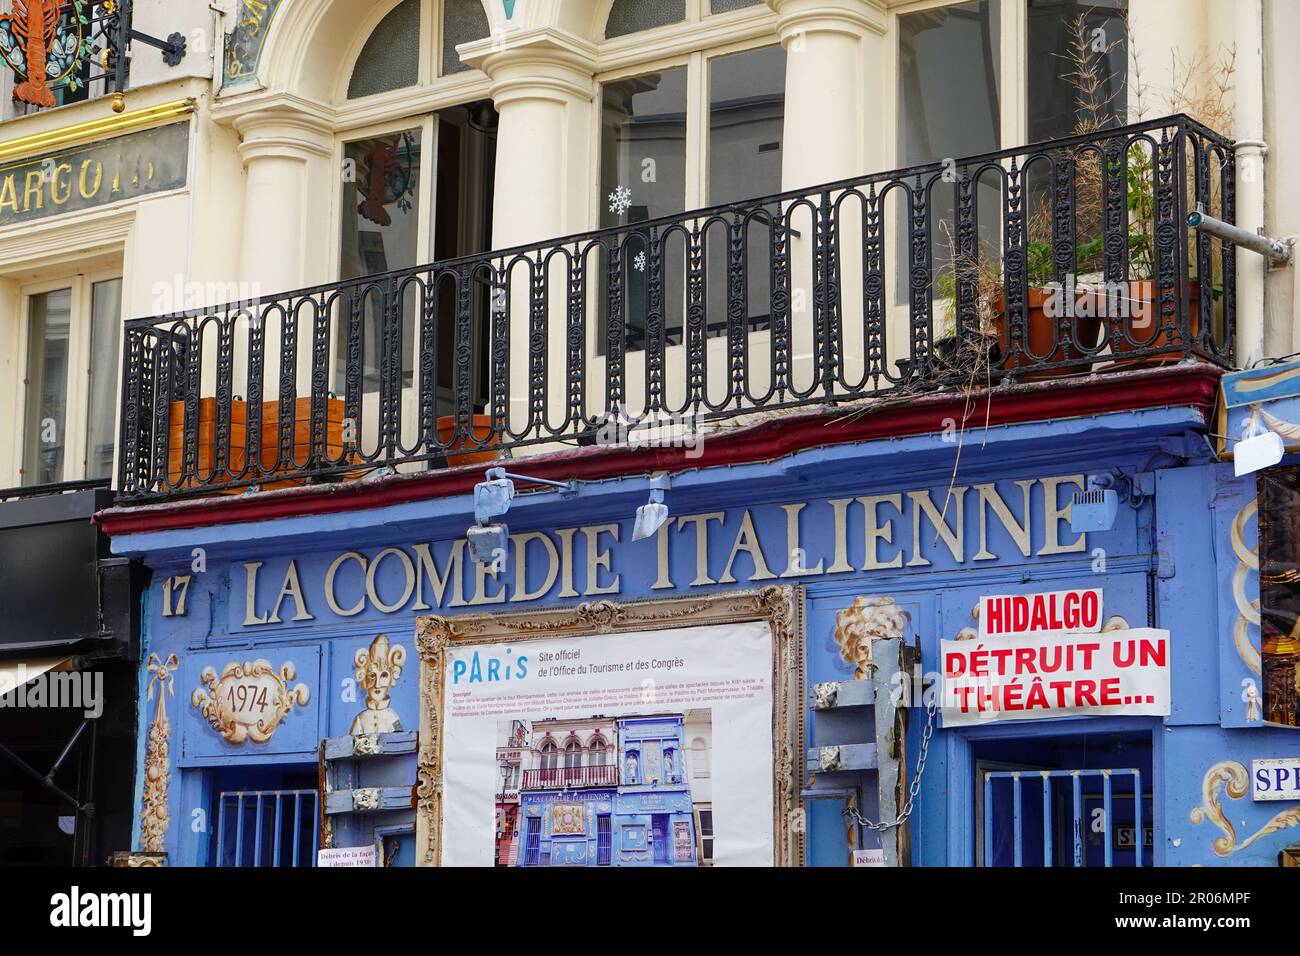 La Comedie Italienne front facade of the theater, Paris, France. Stock Photo